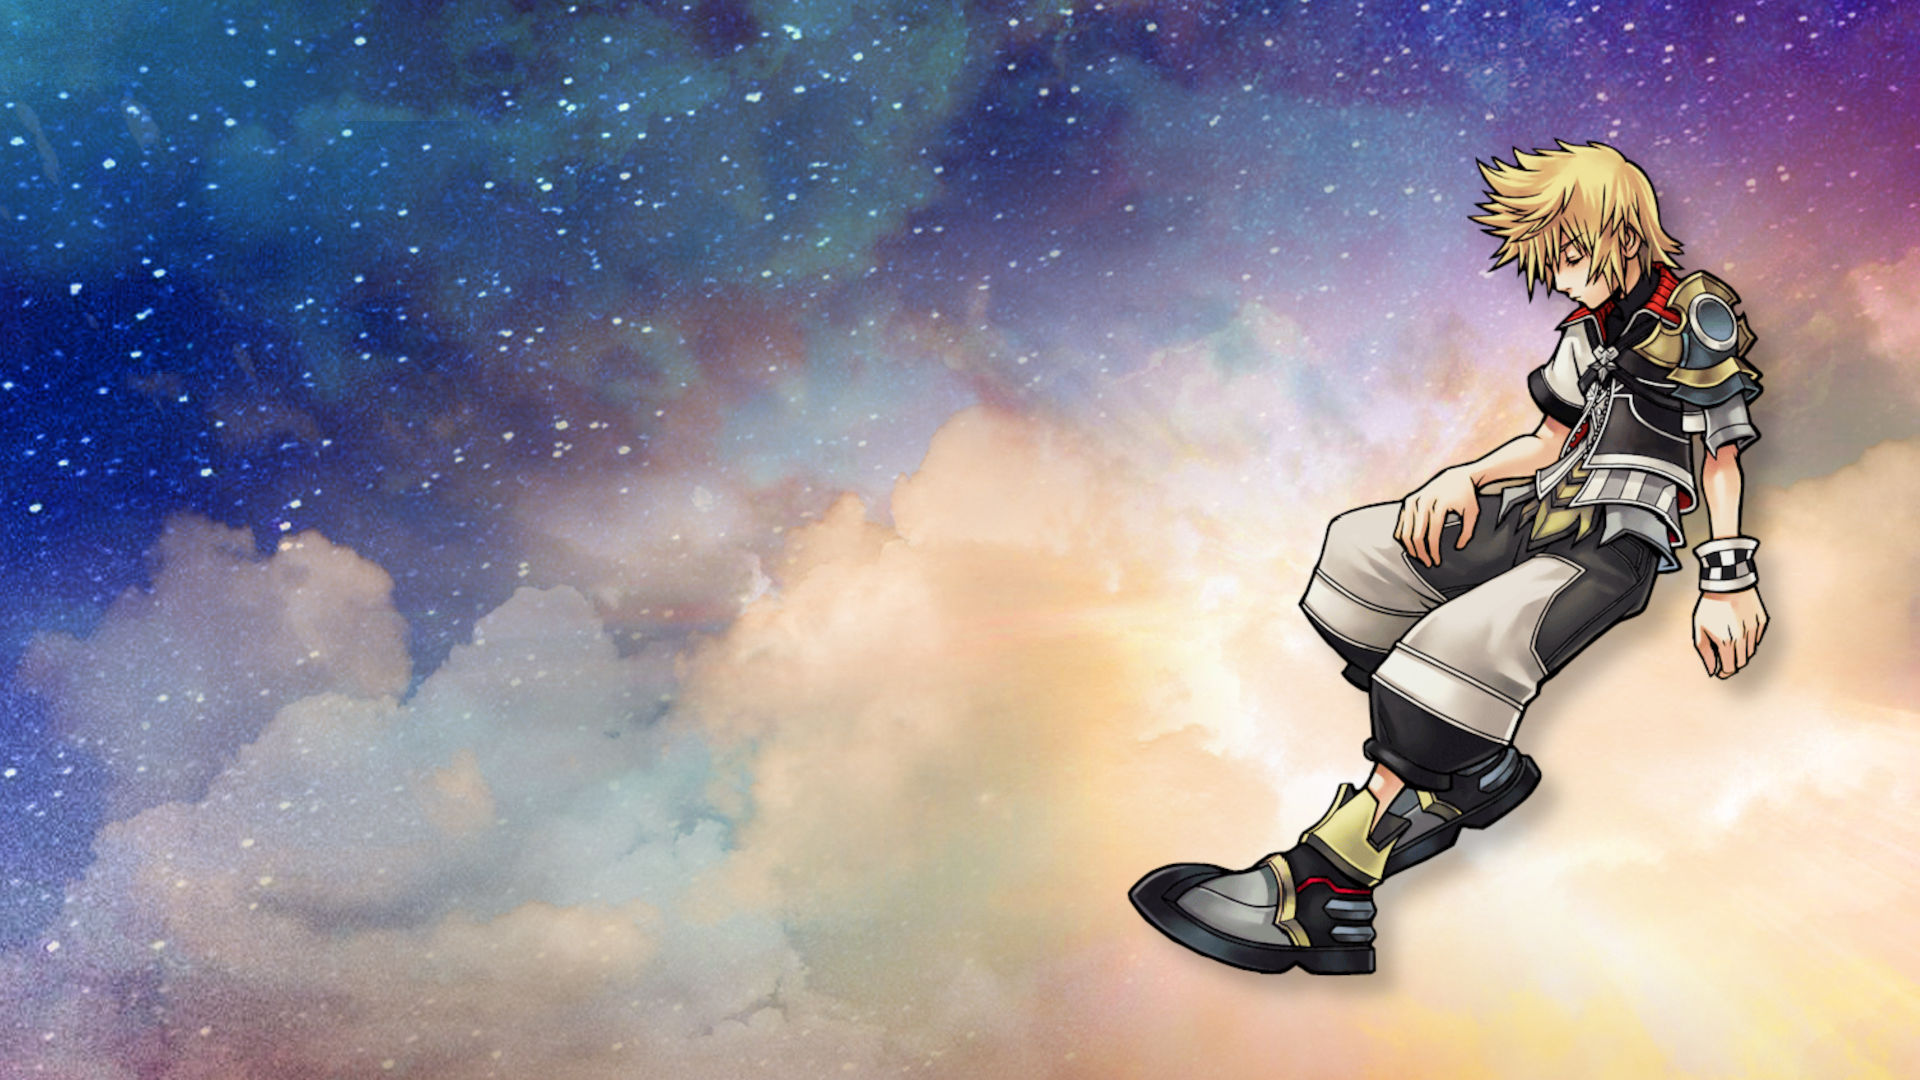 40 Kingdom Hearts III HD Wallpapers and Backgrounds